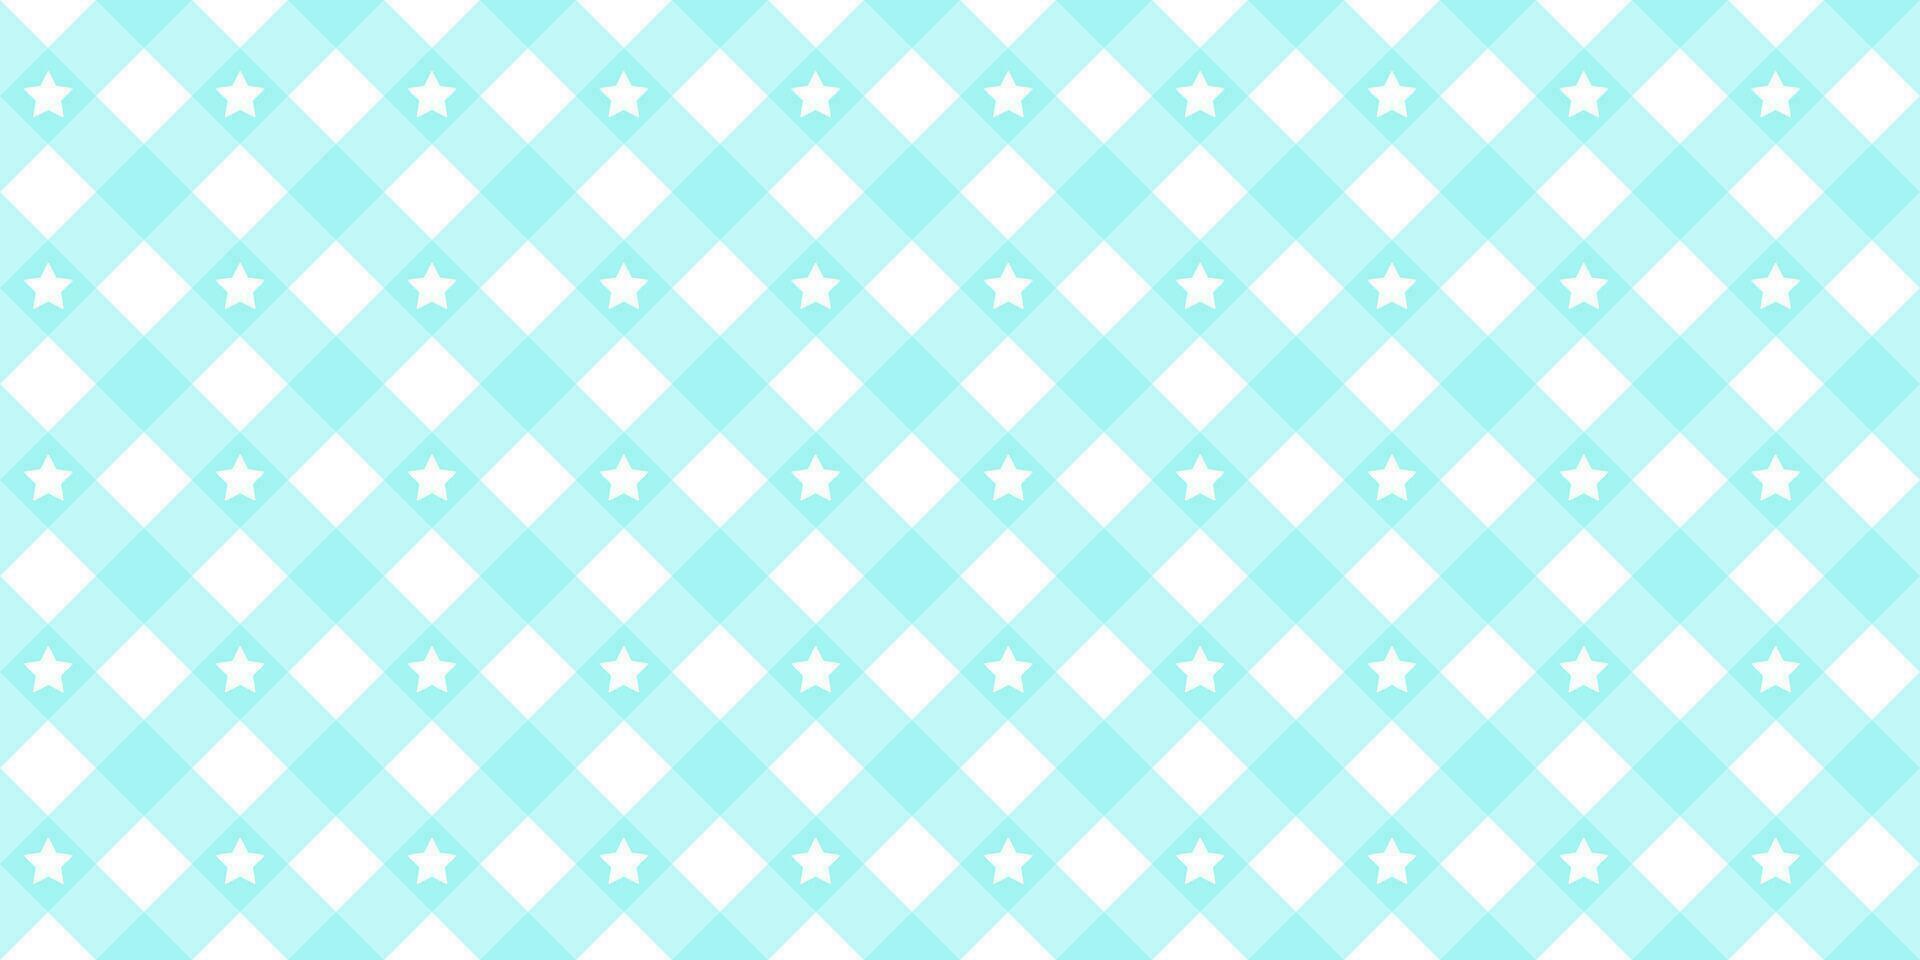 Gingham star diagonal seamless pattern in blue pastel color. Vichy plaid design for Easter holiday textile decorative. Vector checkered pattern for fabric - picnic blanket, tablecloth, dress, napkin.